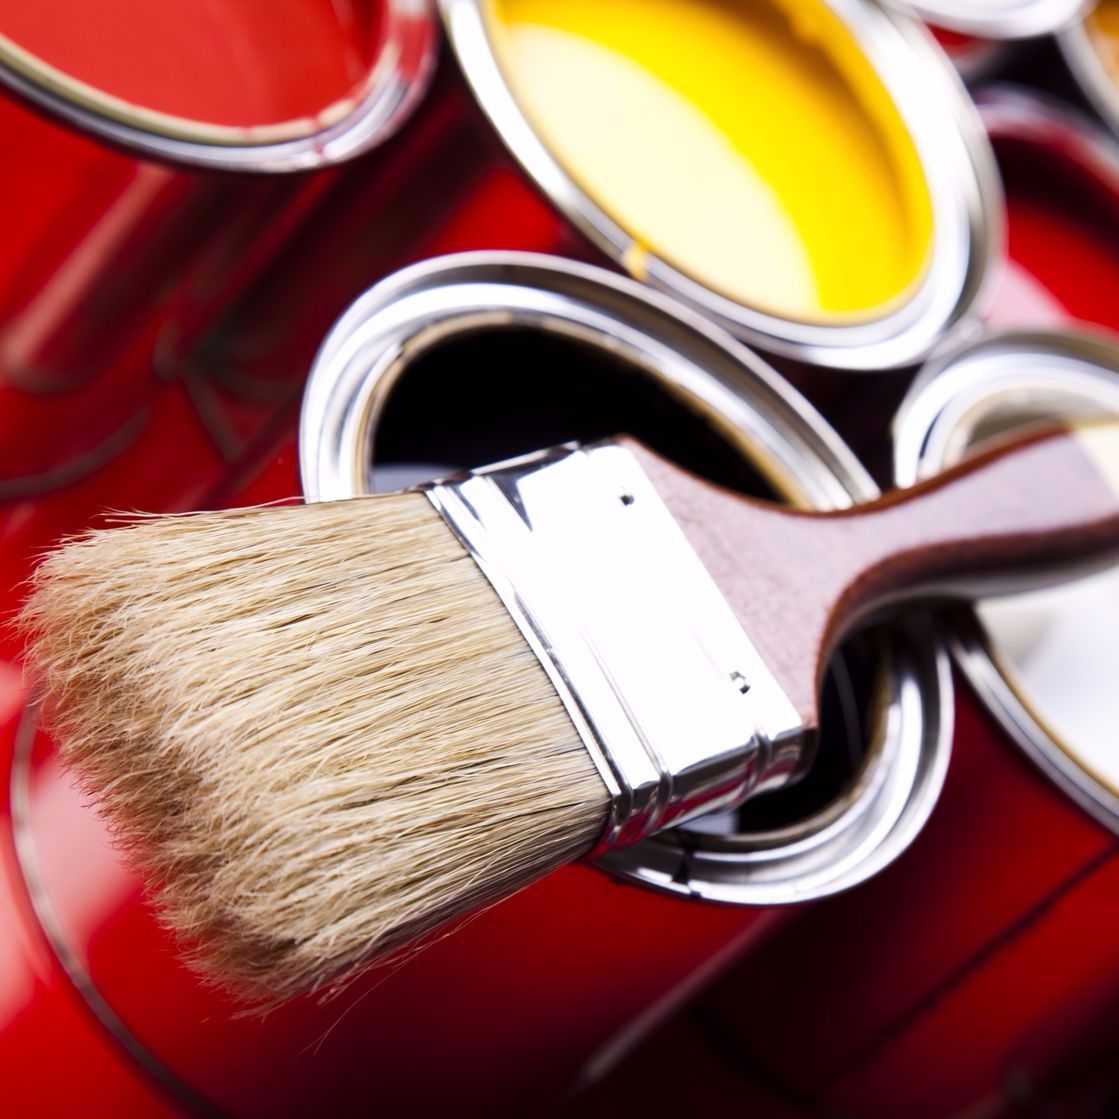 Painting Contractors in Kyle, Texas